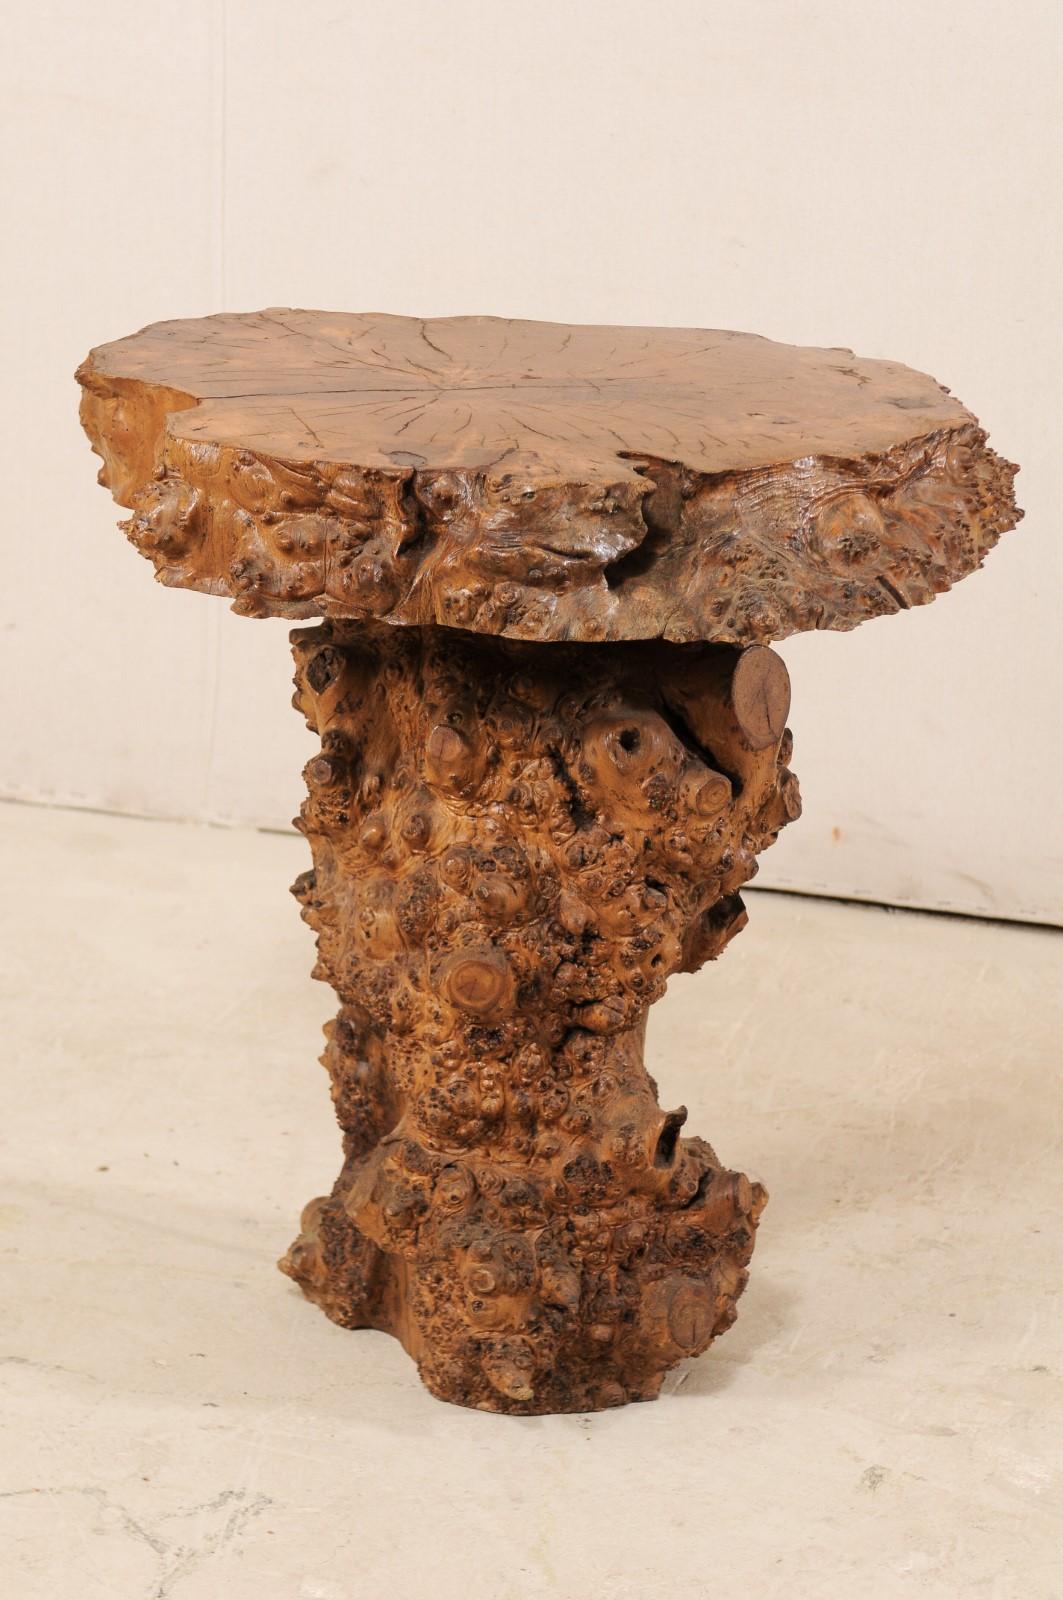 European Live-Edge Burl Side Table with Slab Top & Knobby Texture, Early 20th C. In Good Condition For Sale In Atlanta, GA